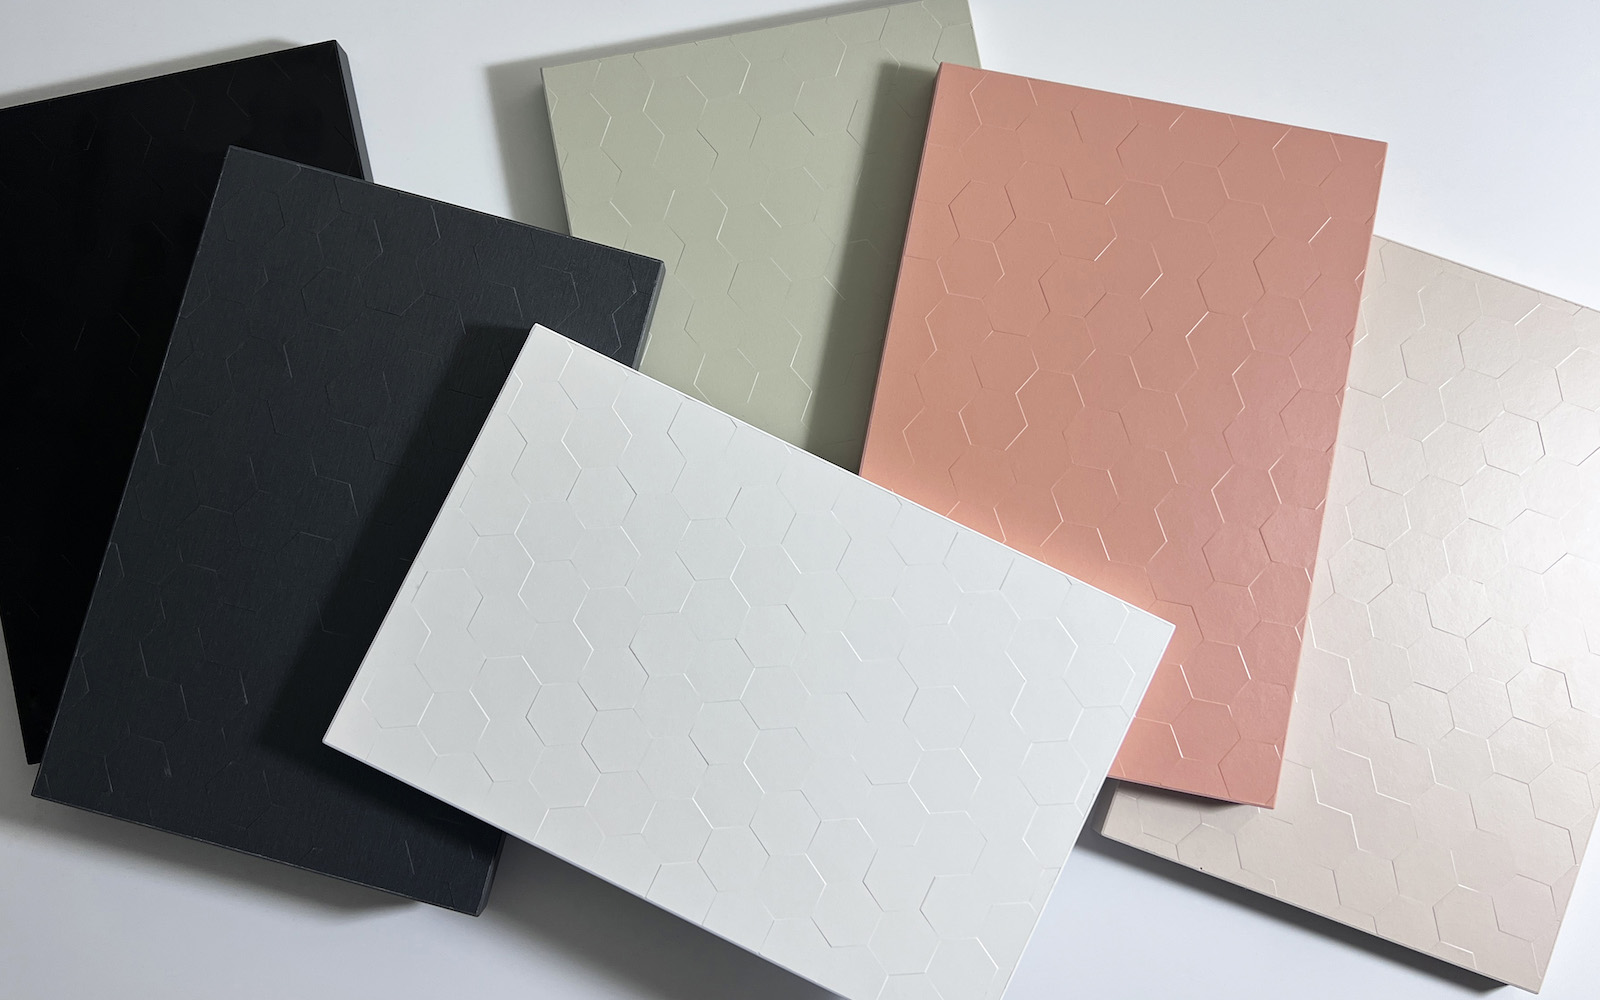 Samples from UNILIN Panels